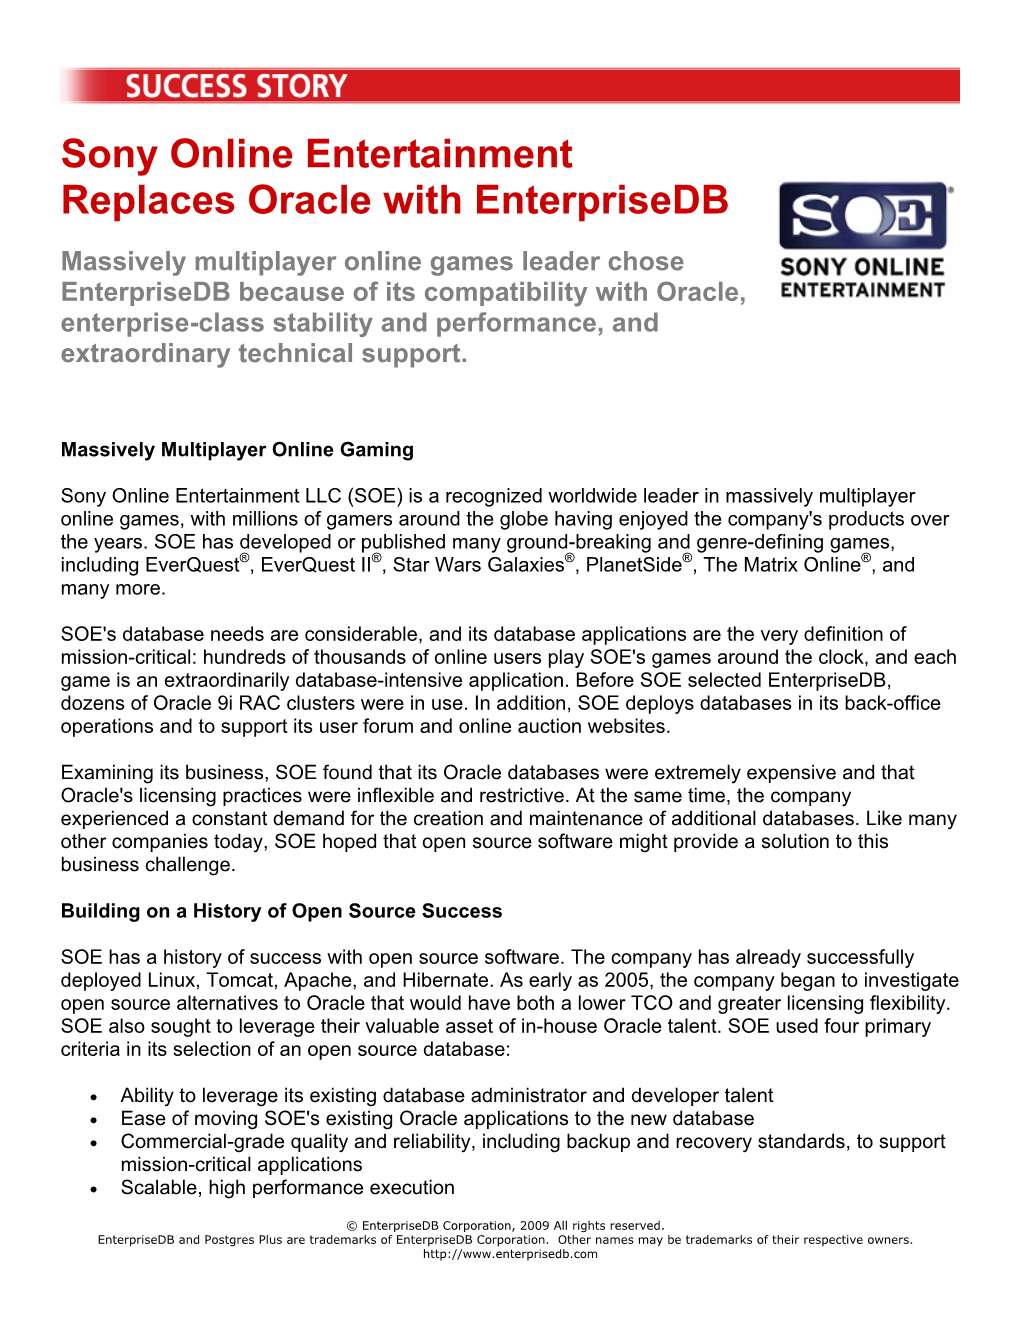 Sony Online Entertainment Replaces Oracle with Enterprisedb